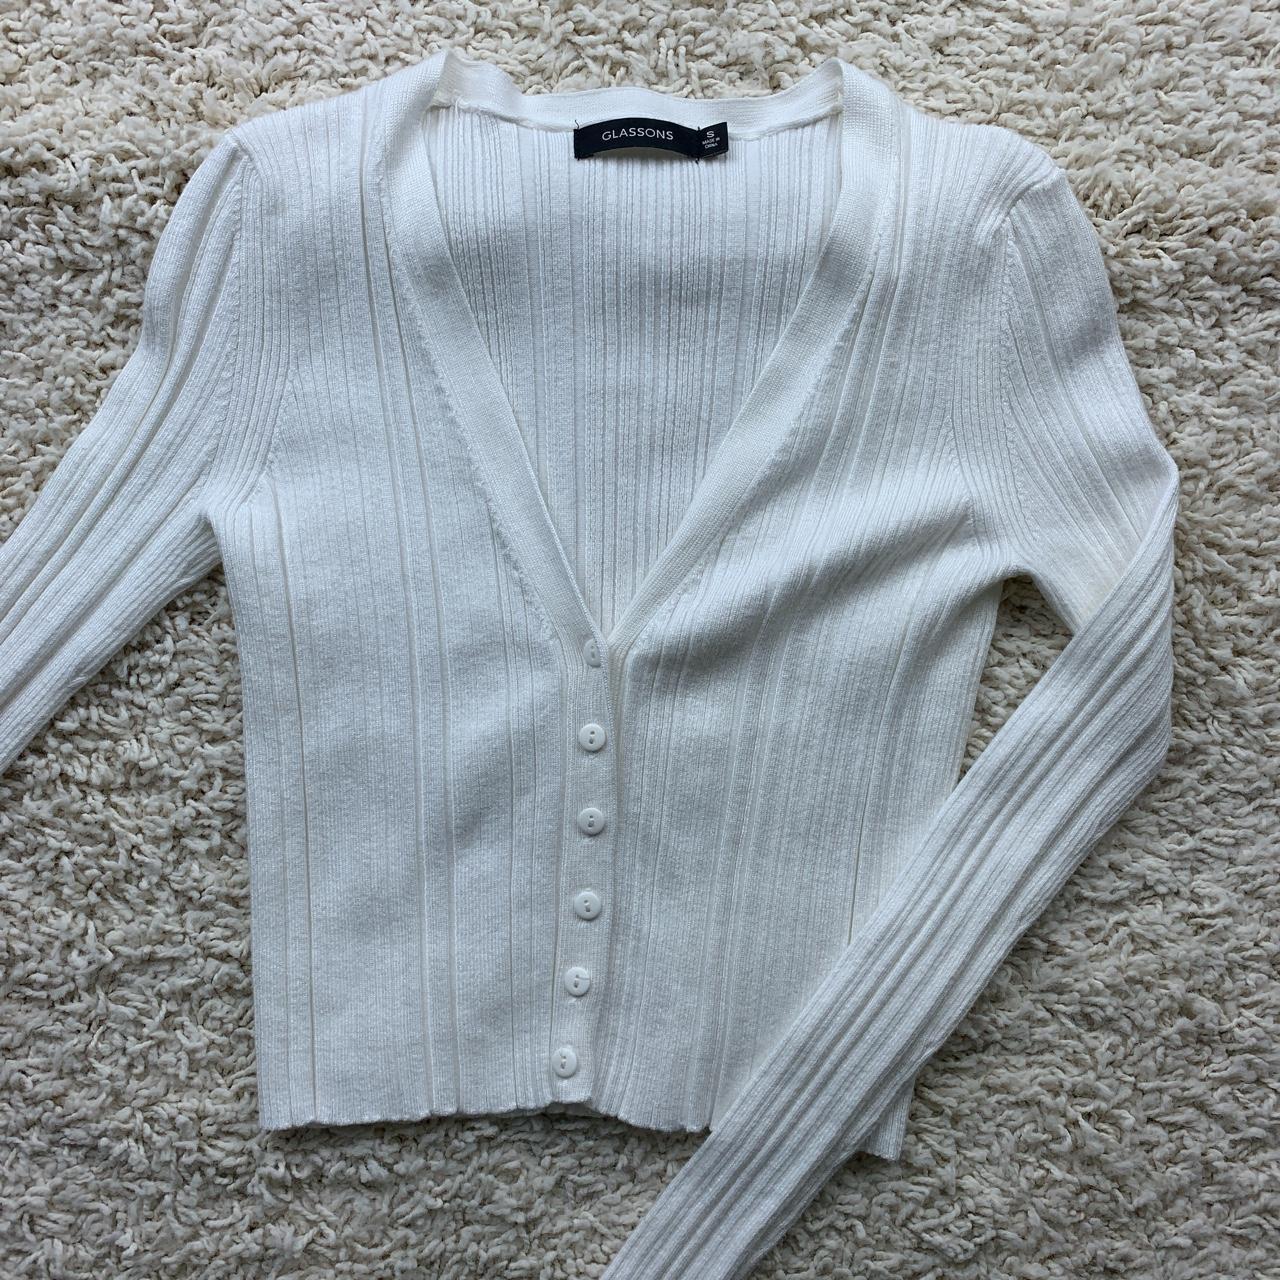 Glassons white button up cardigan • Thin sweater... - Depop